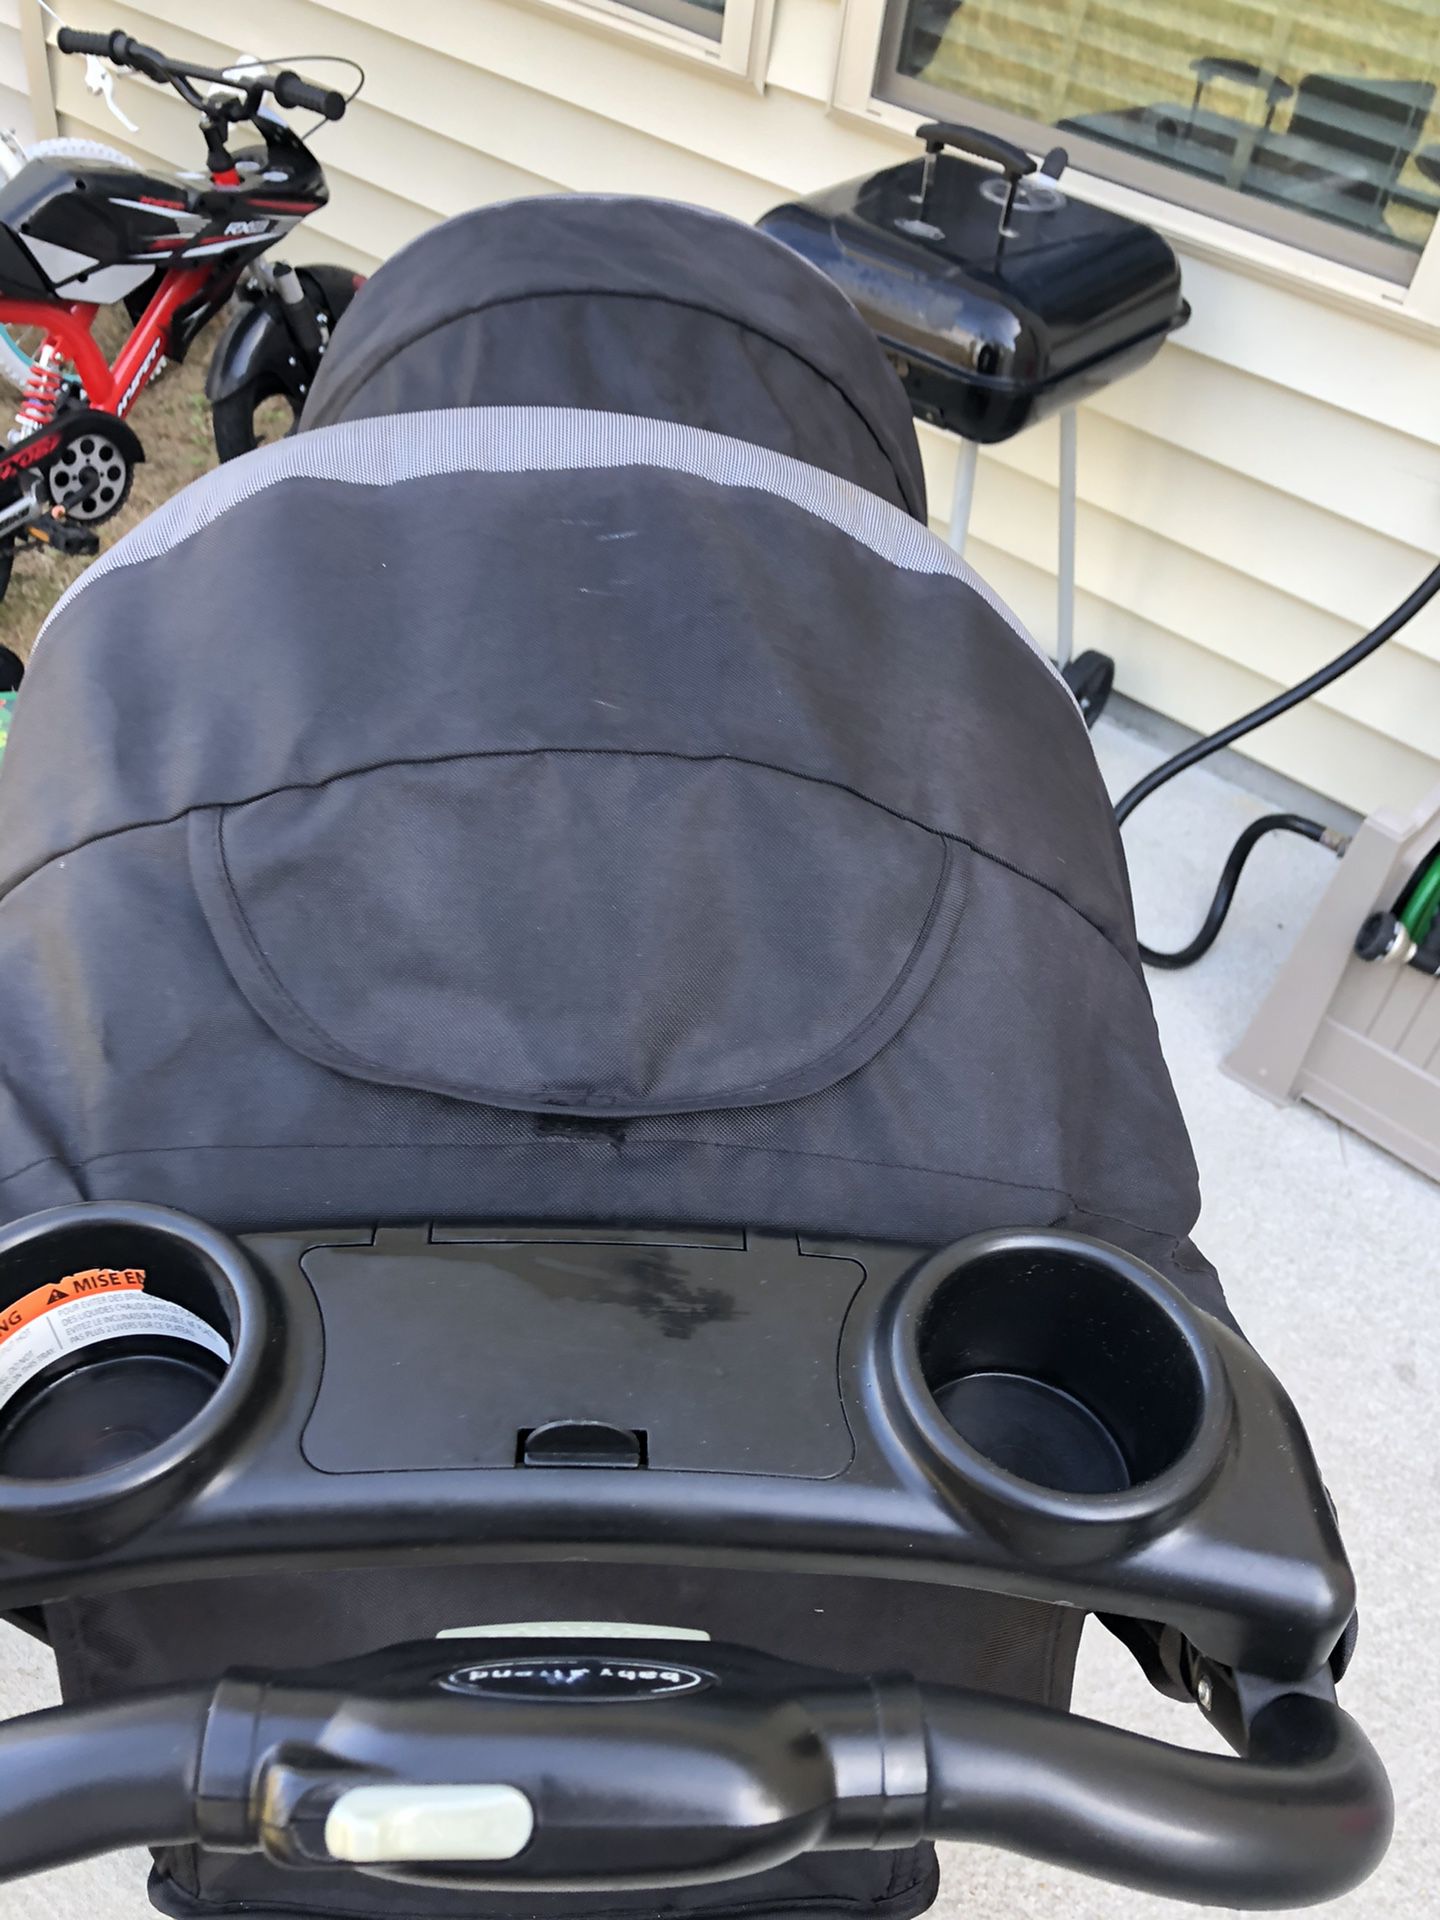 Double seat stroller